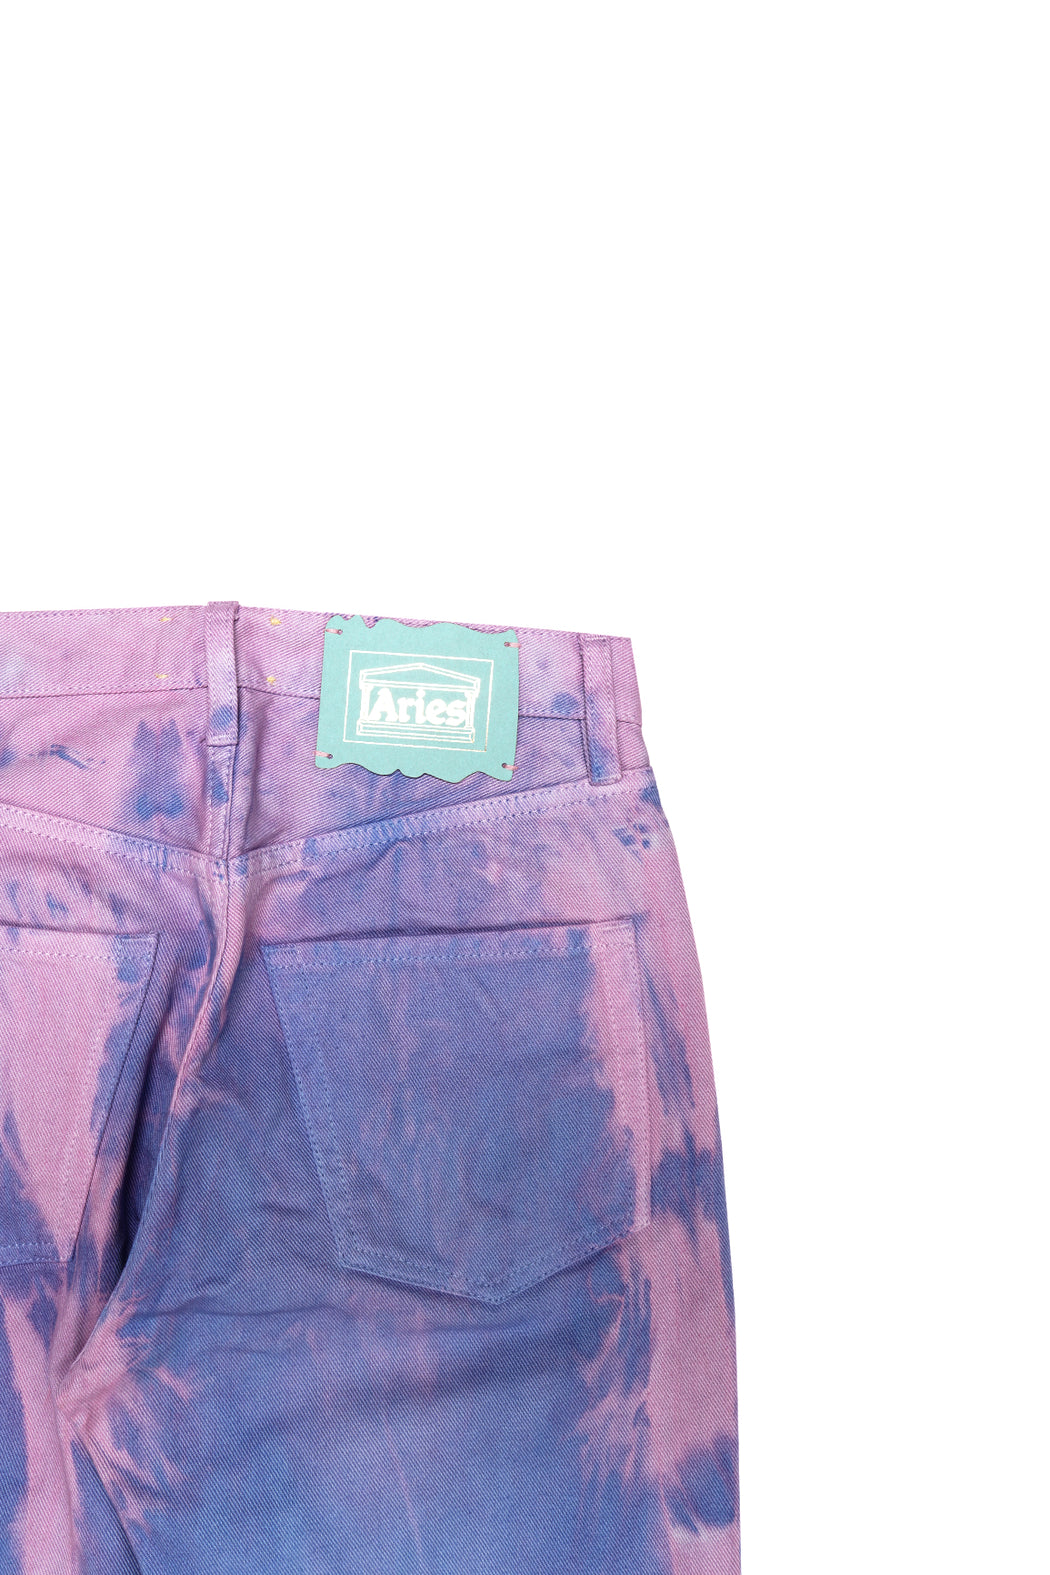 MLP Dyed Lilly Jeans - Lilac